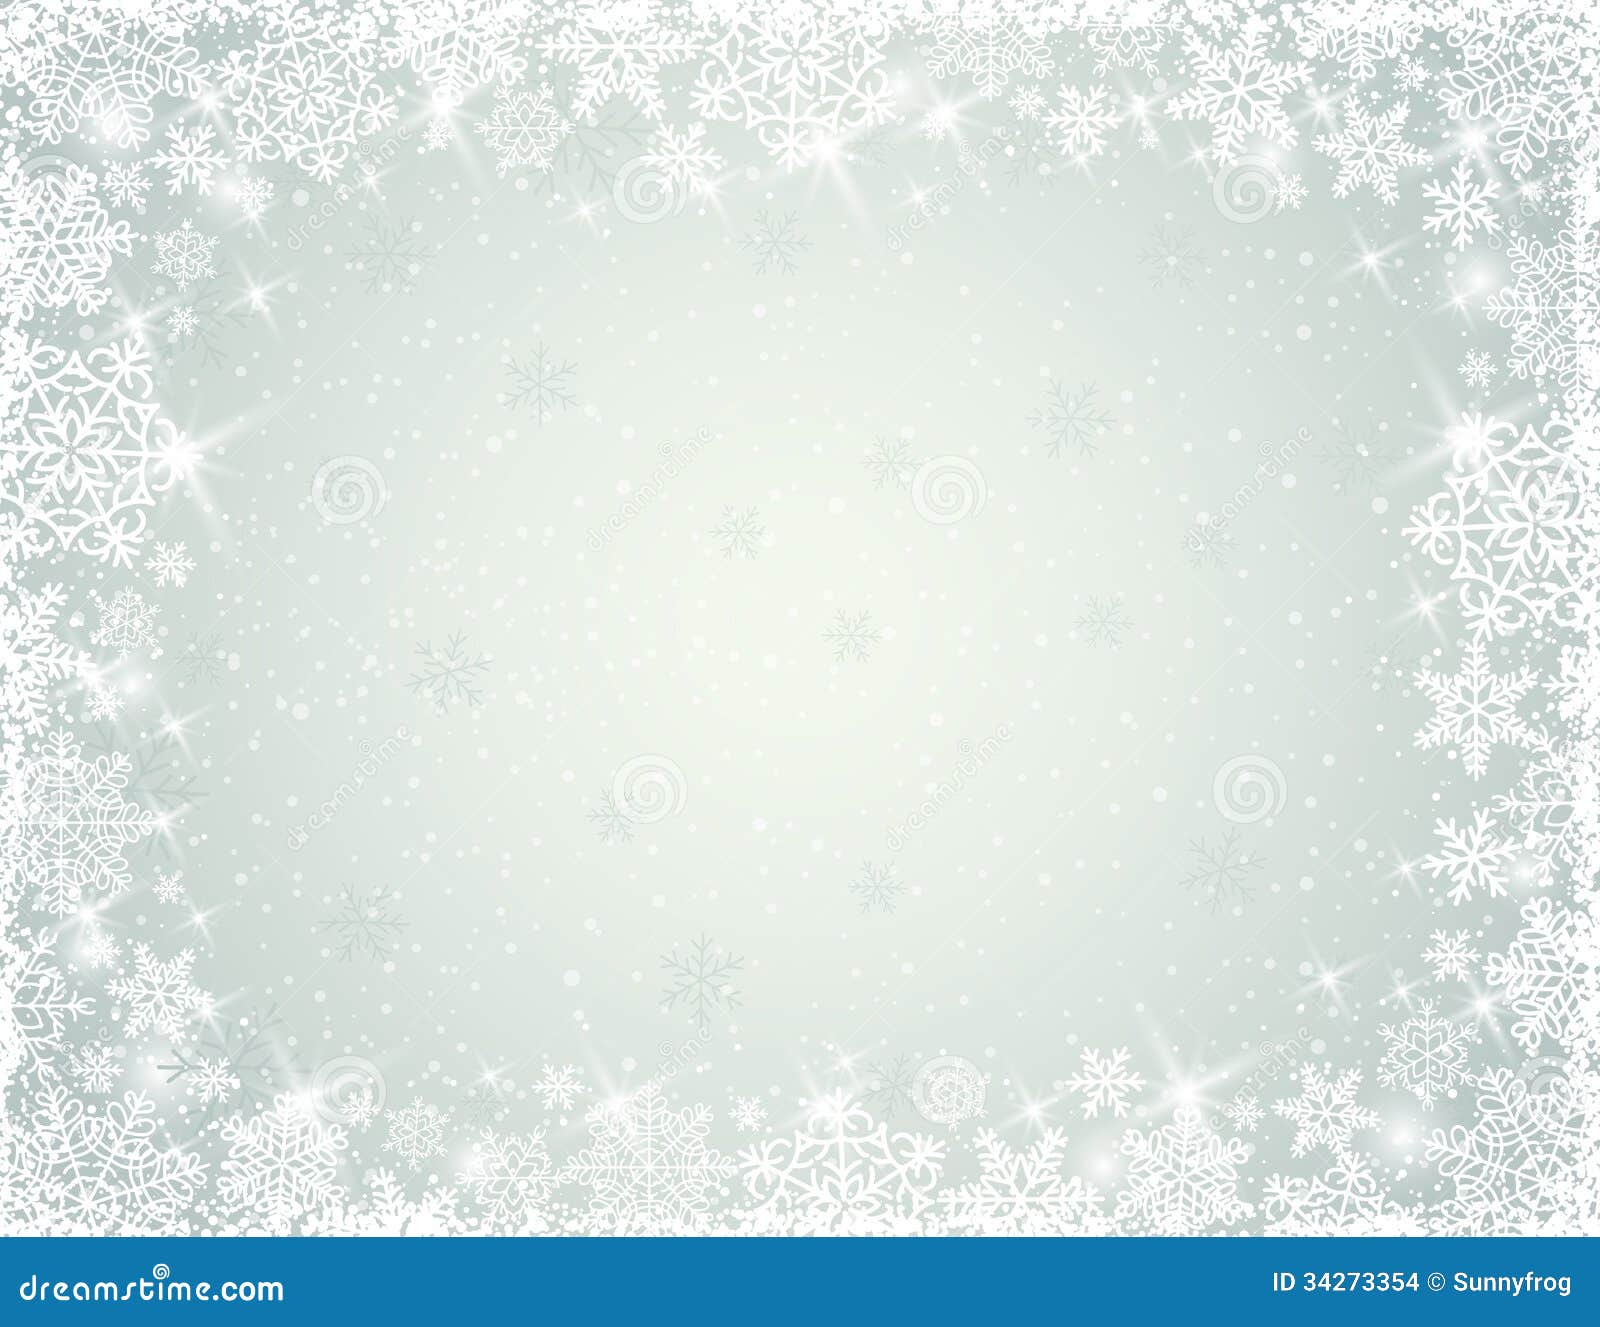 Grey Background With Snowflakes, Vector Stock Images 